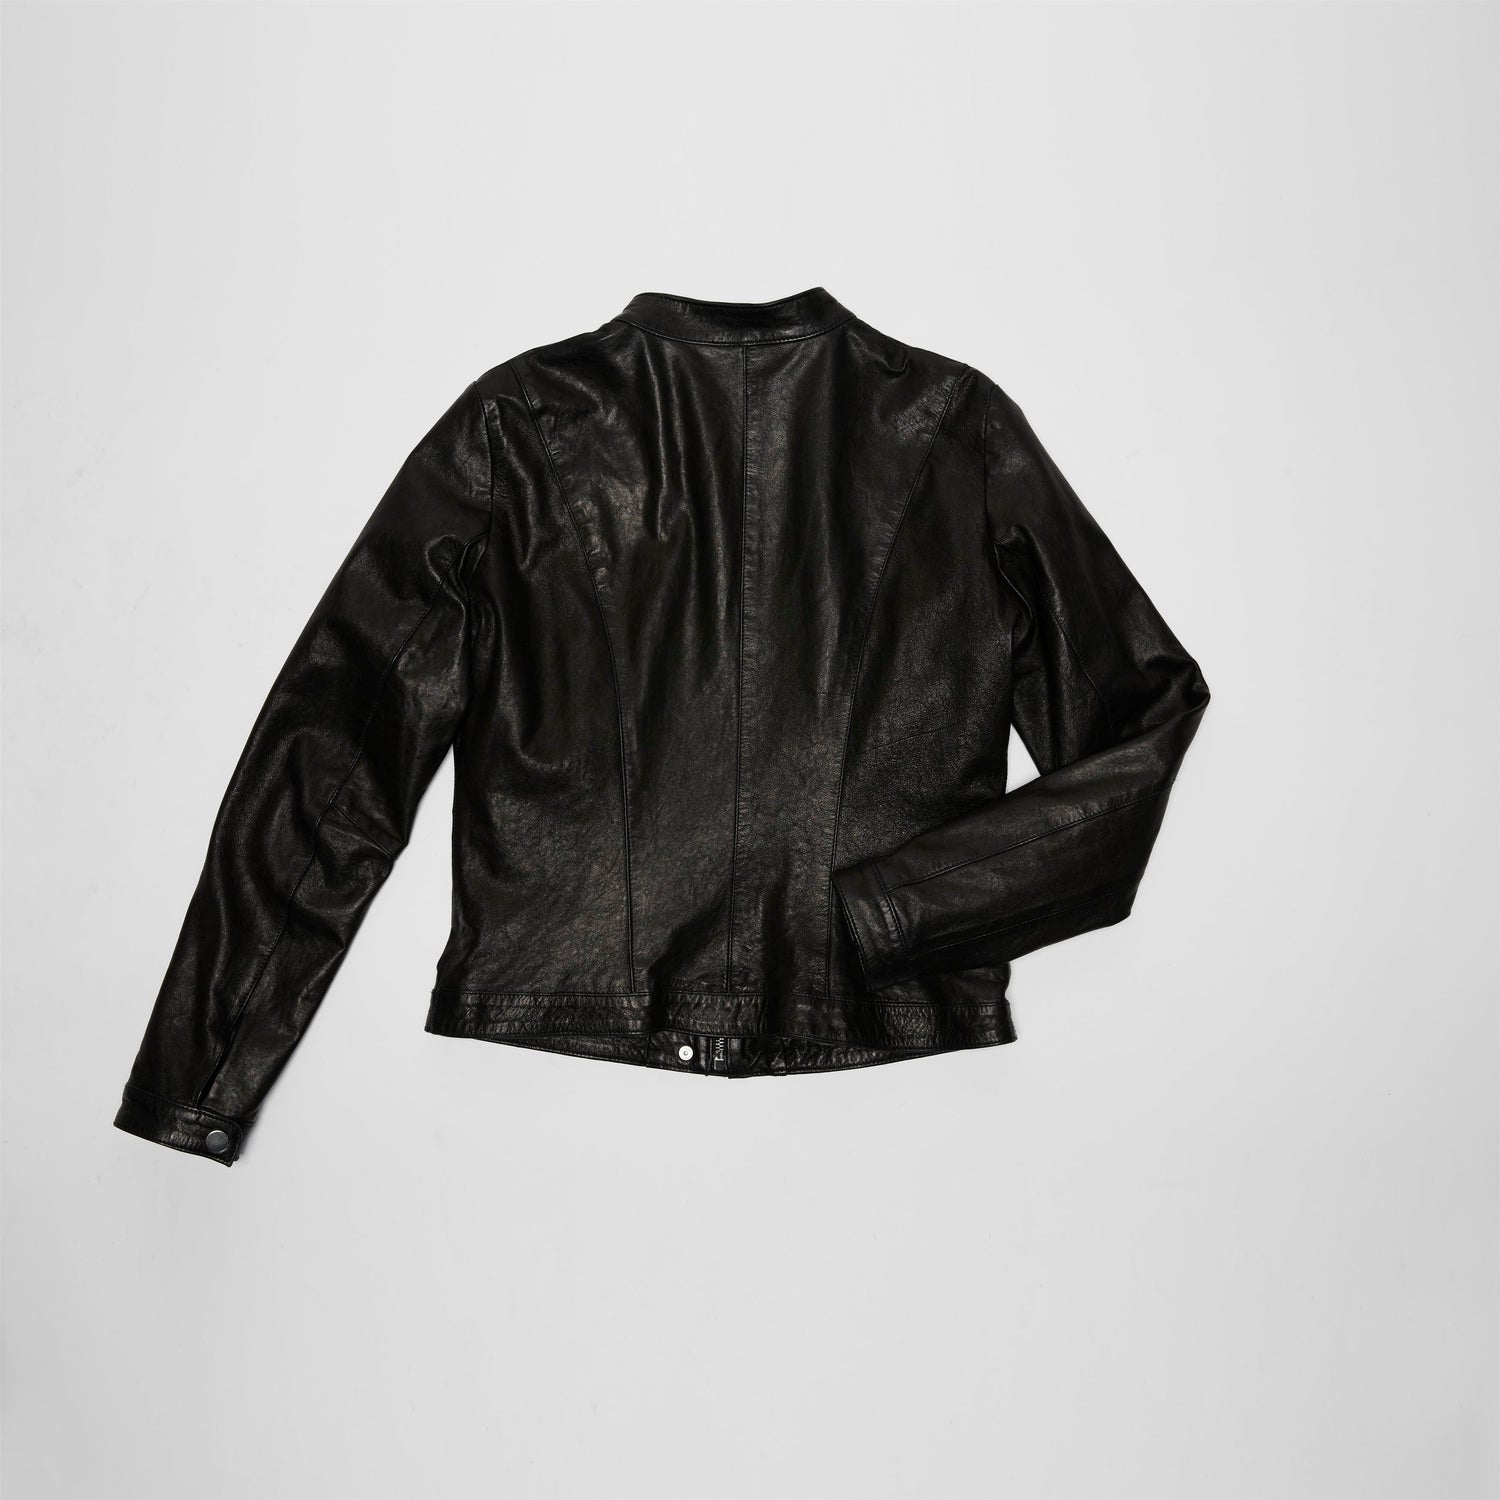 A.S.98 Leather Jacket - Jude - A.S. 98 - 